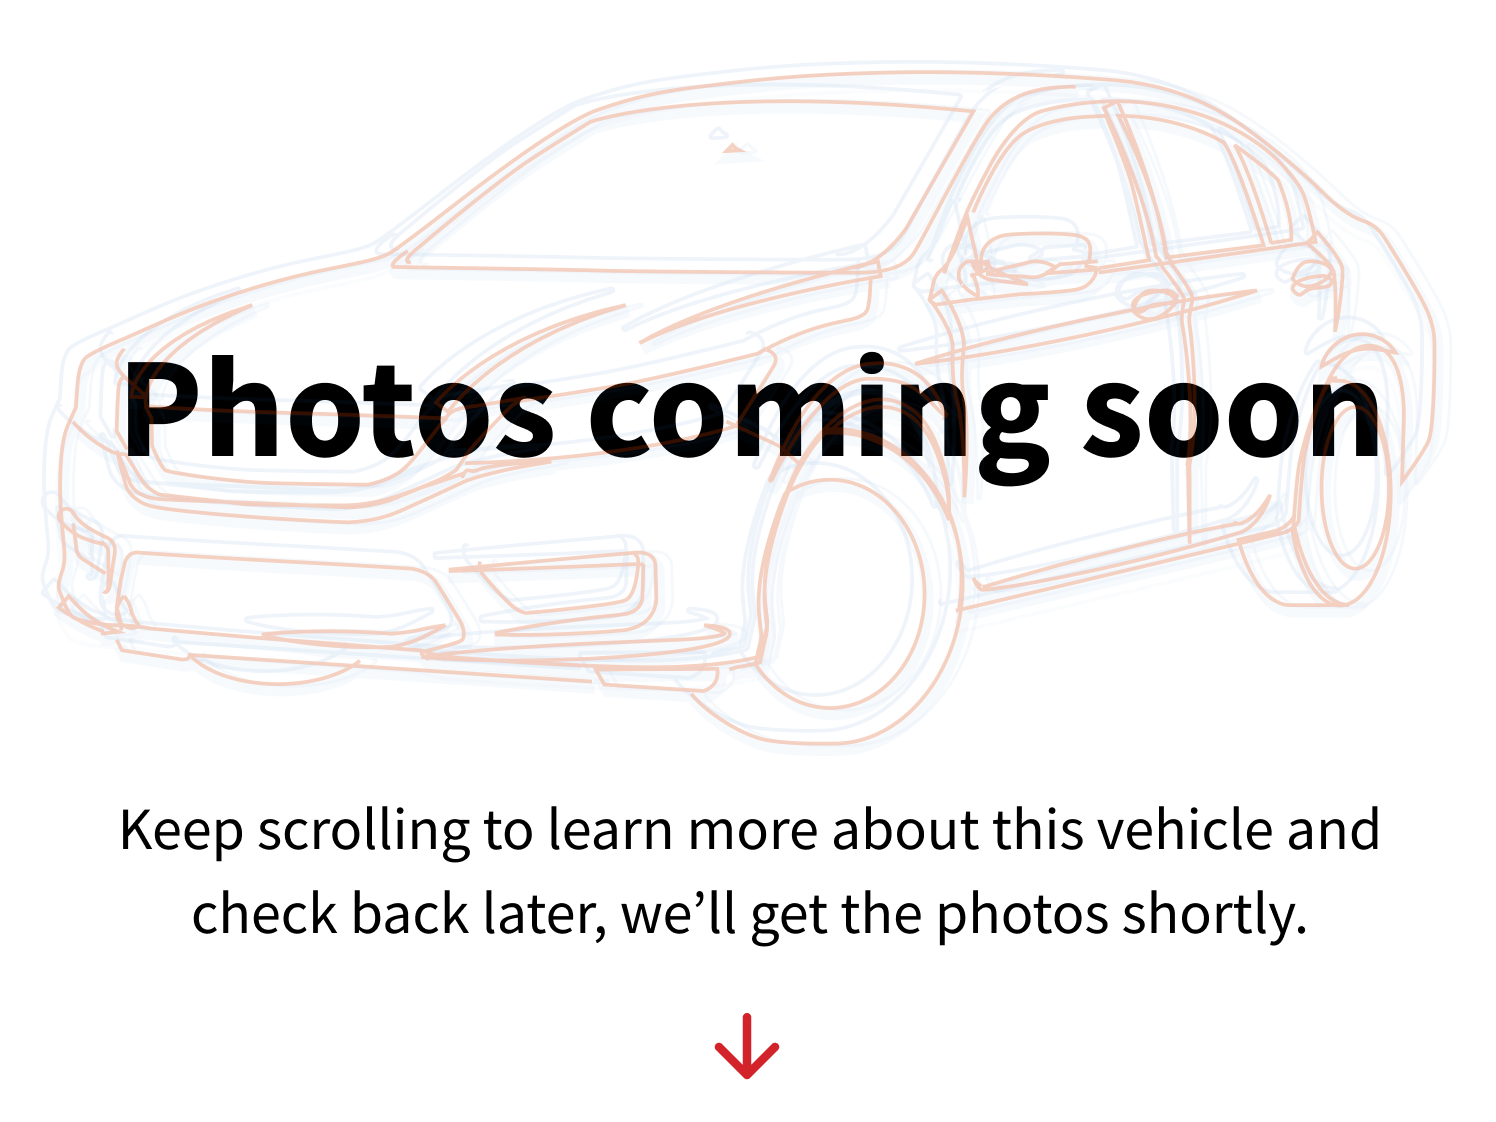 Photos coming soon. Keep scrolling to learn more about this vehicle and check back later, we'll get the photos shortly